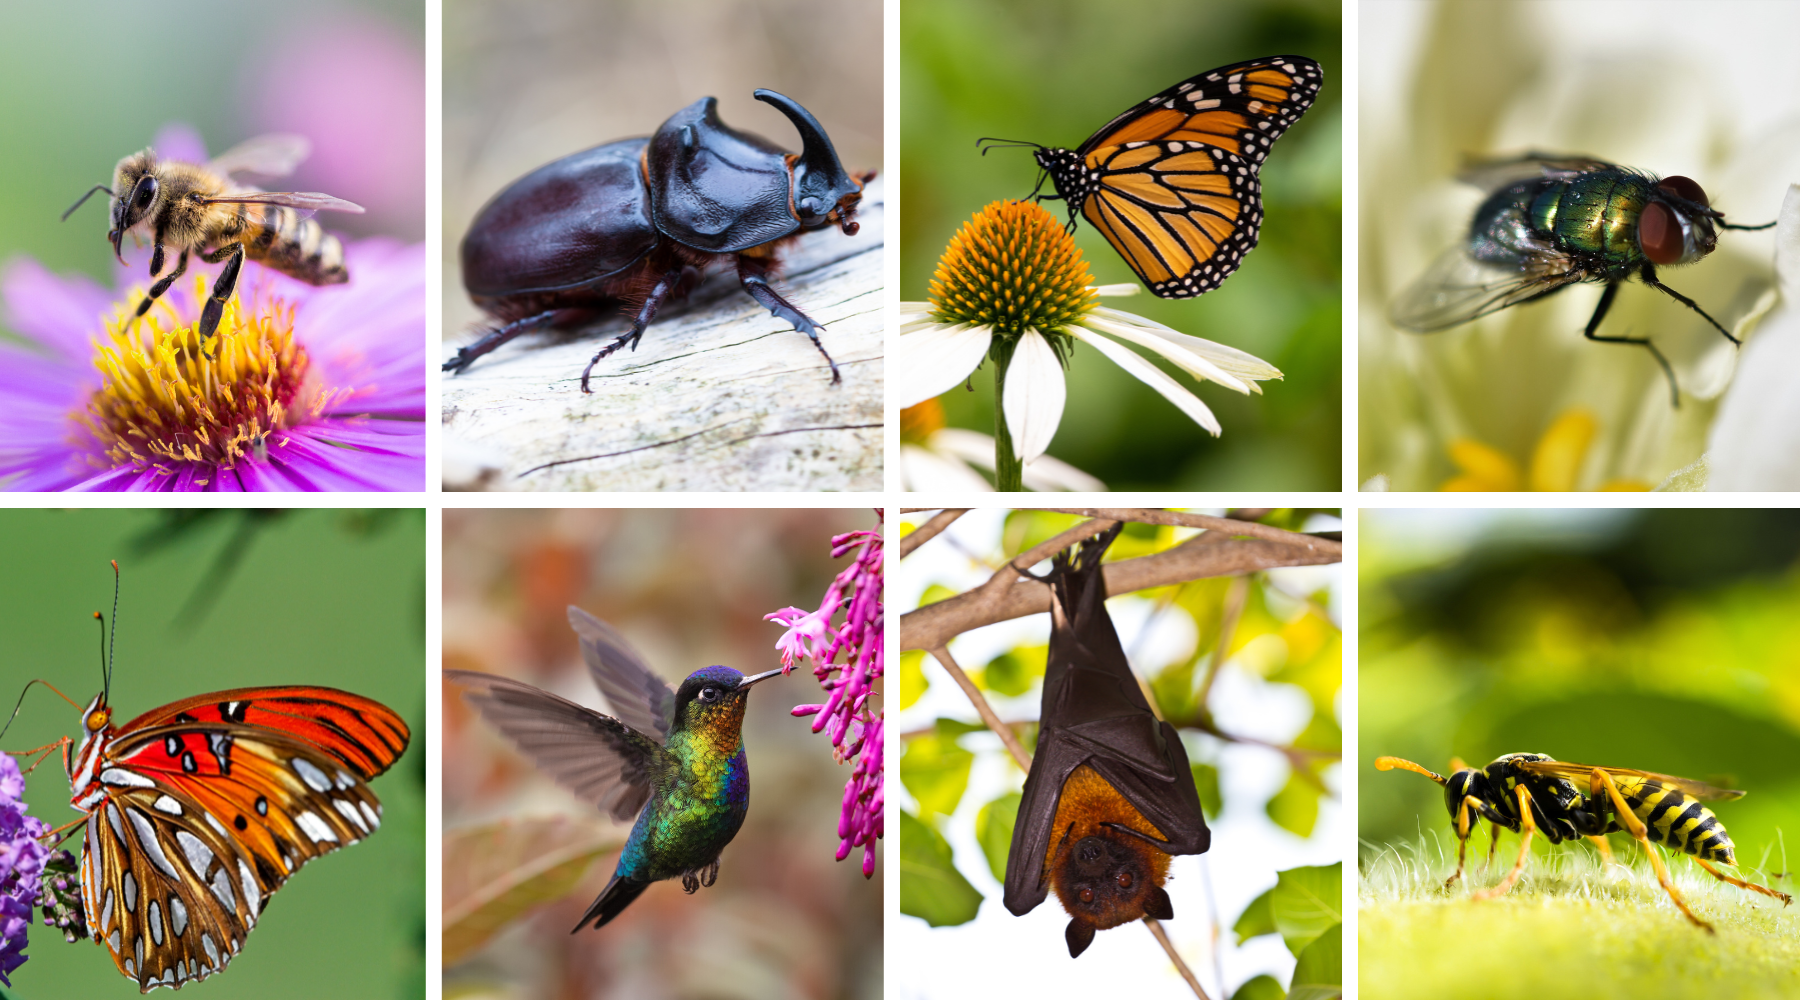 Collage of 8 pollinators: Bee, Beetle, Butterfly, Fly, Moth, Hummingbird, Bat, and Wasp